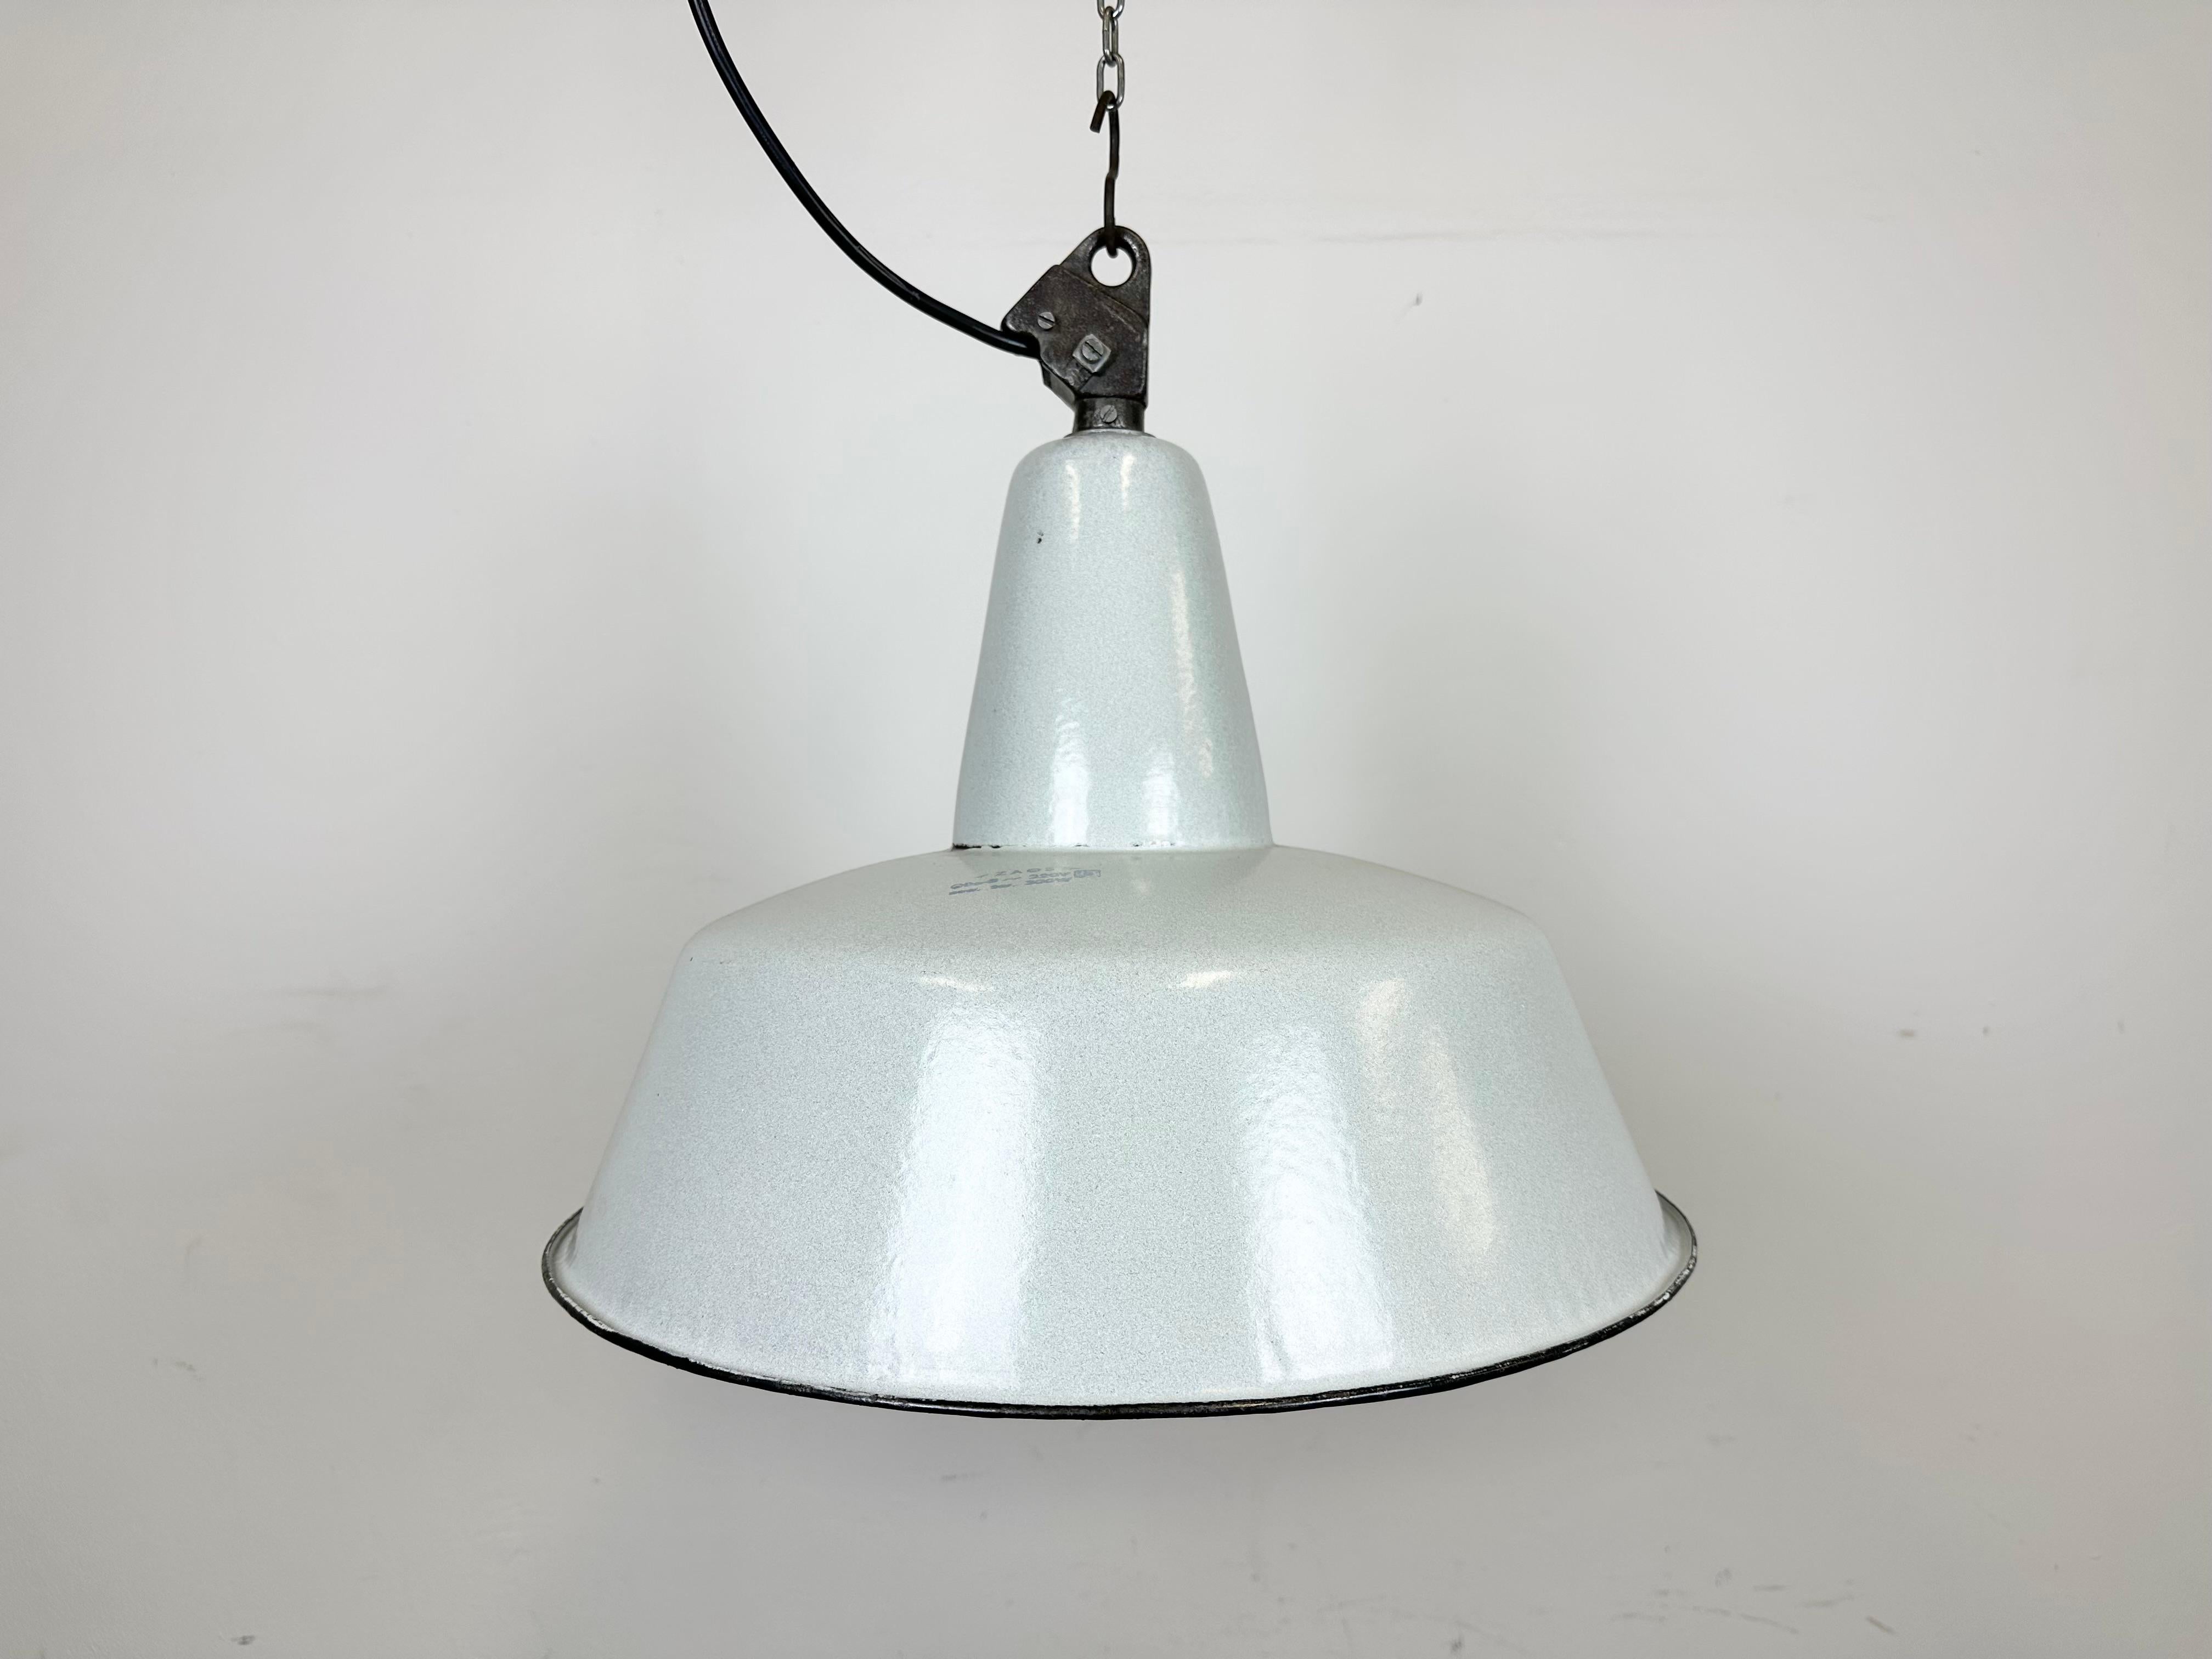 Industrial grey enamel pendant light made by Zaos in Poland during the 1960s. White enamel inside the shade. Cast iron top. The socket requires E 27/ E 26 light bulbs. New wire. The weight of the lamp is 2.3 kg.The diameter of the lamp is 42 cm.